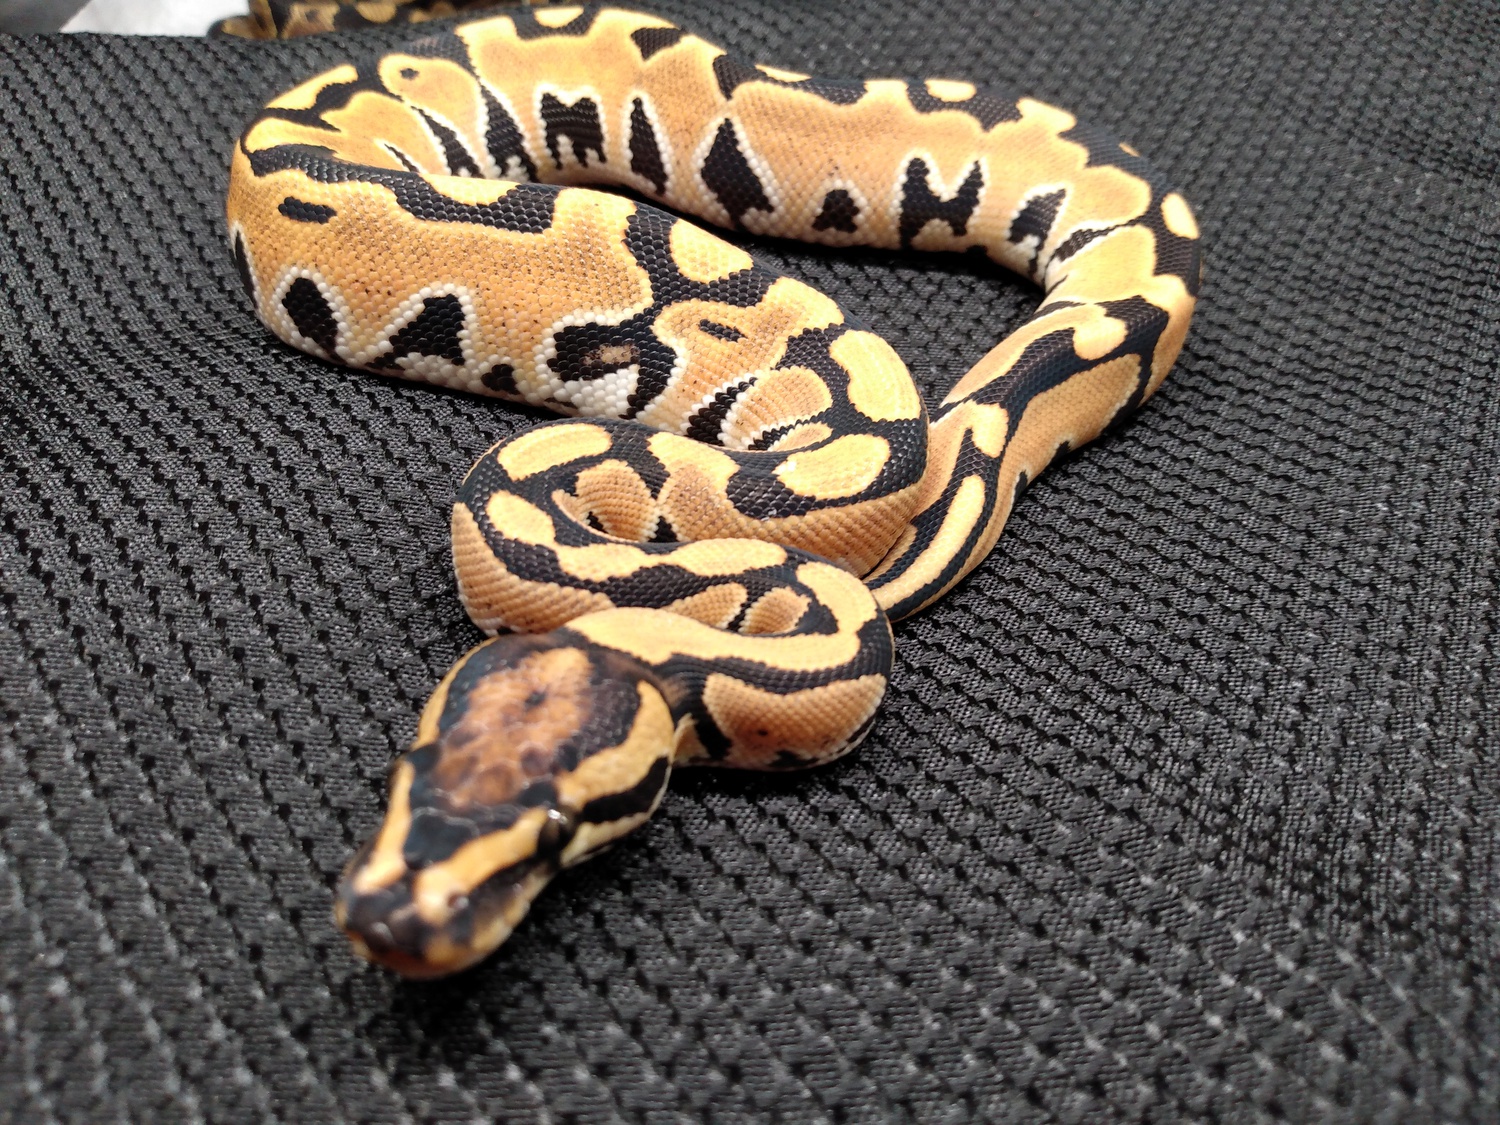 White Lace Fire Jungle Woma Ball Python by Mythical Exotics